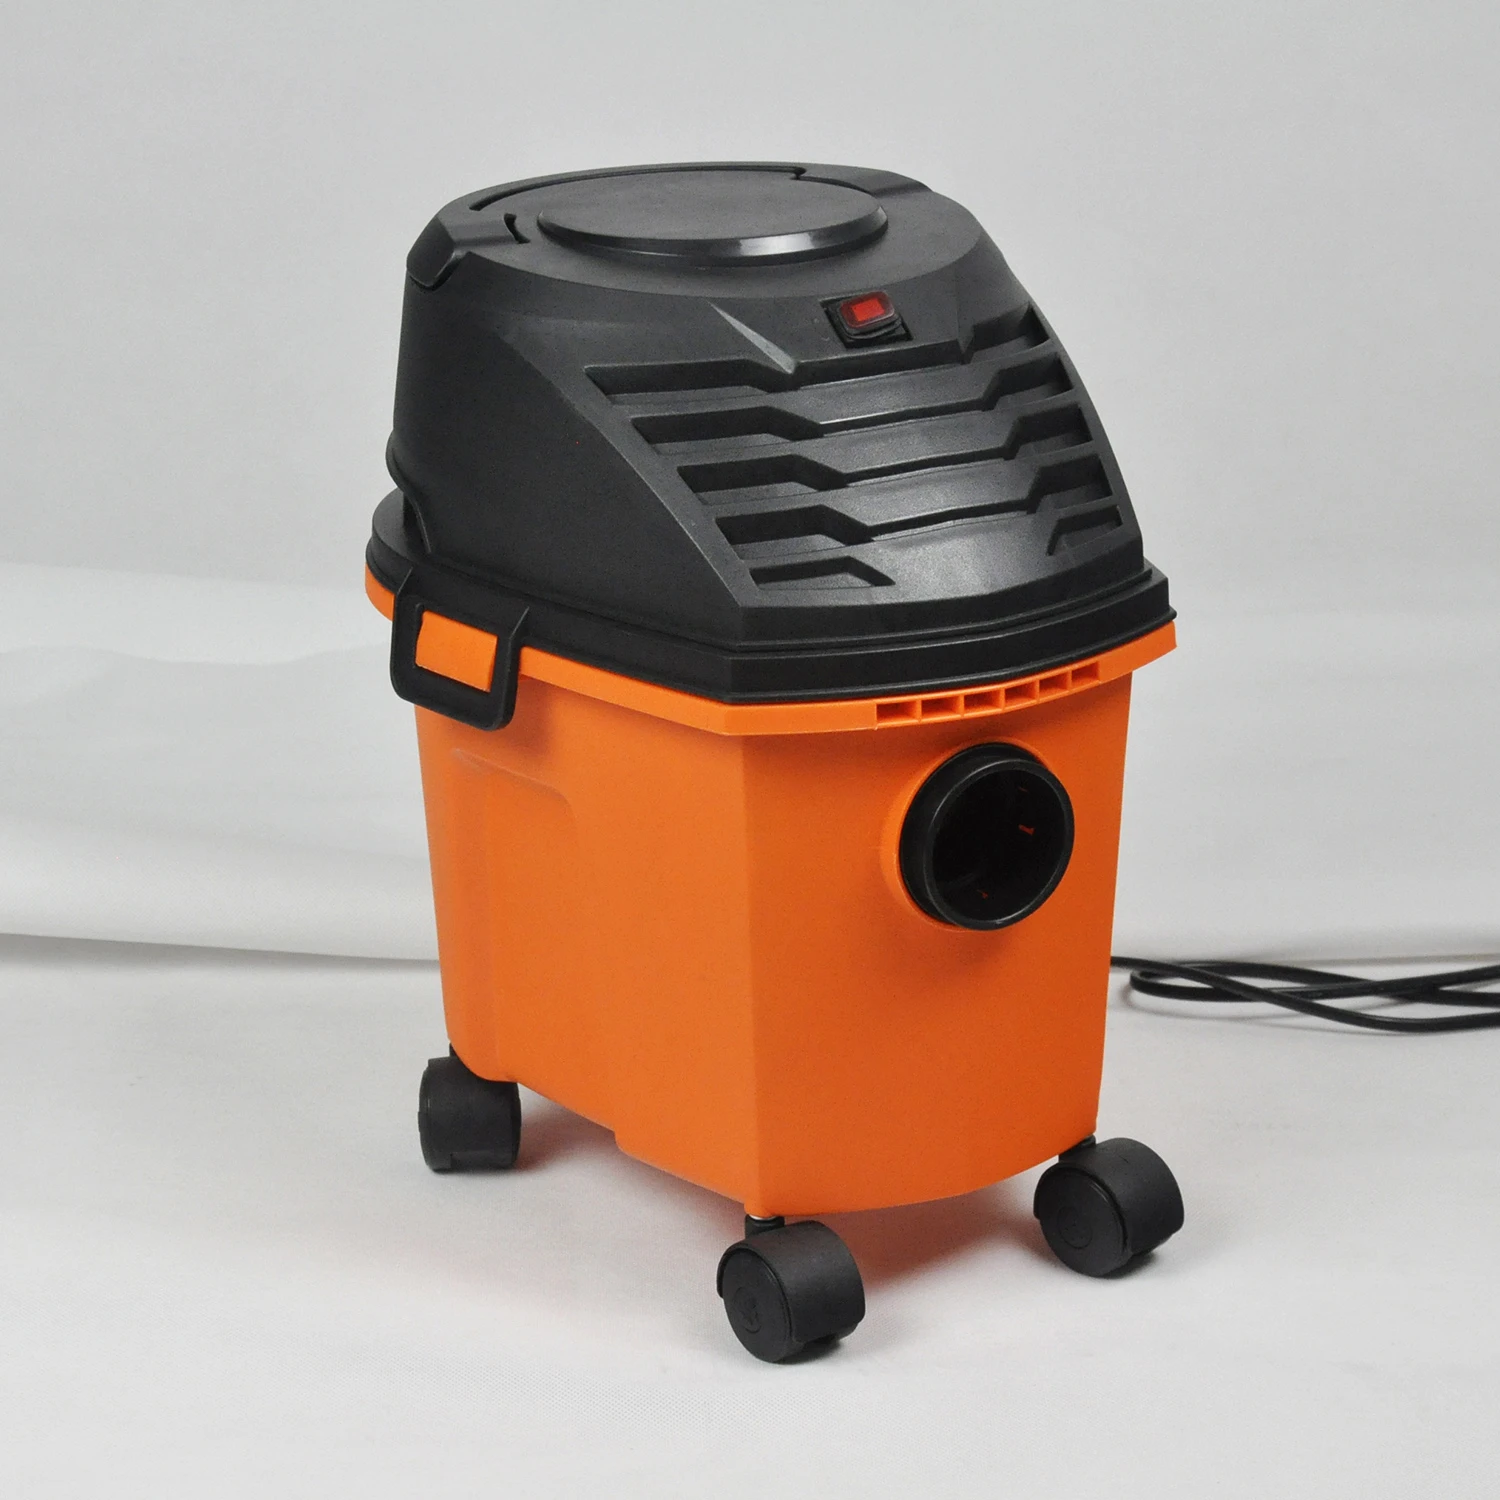 Modern Design Vaccum Cleaner Robot Wet And Dry Vacum Cleaner Dry And Wet Car Vaccum Cleaner Wet And Dry